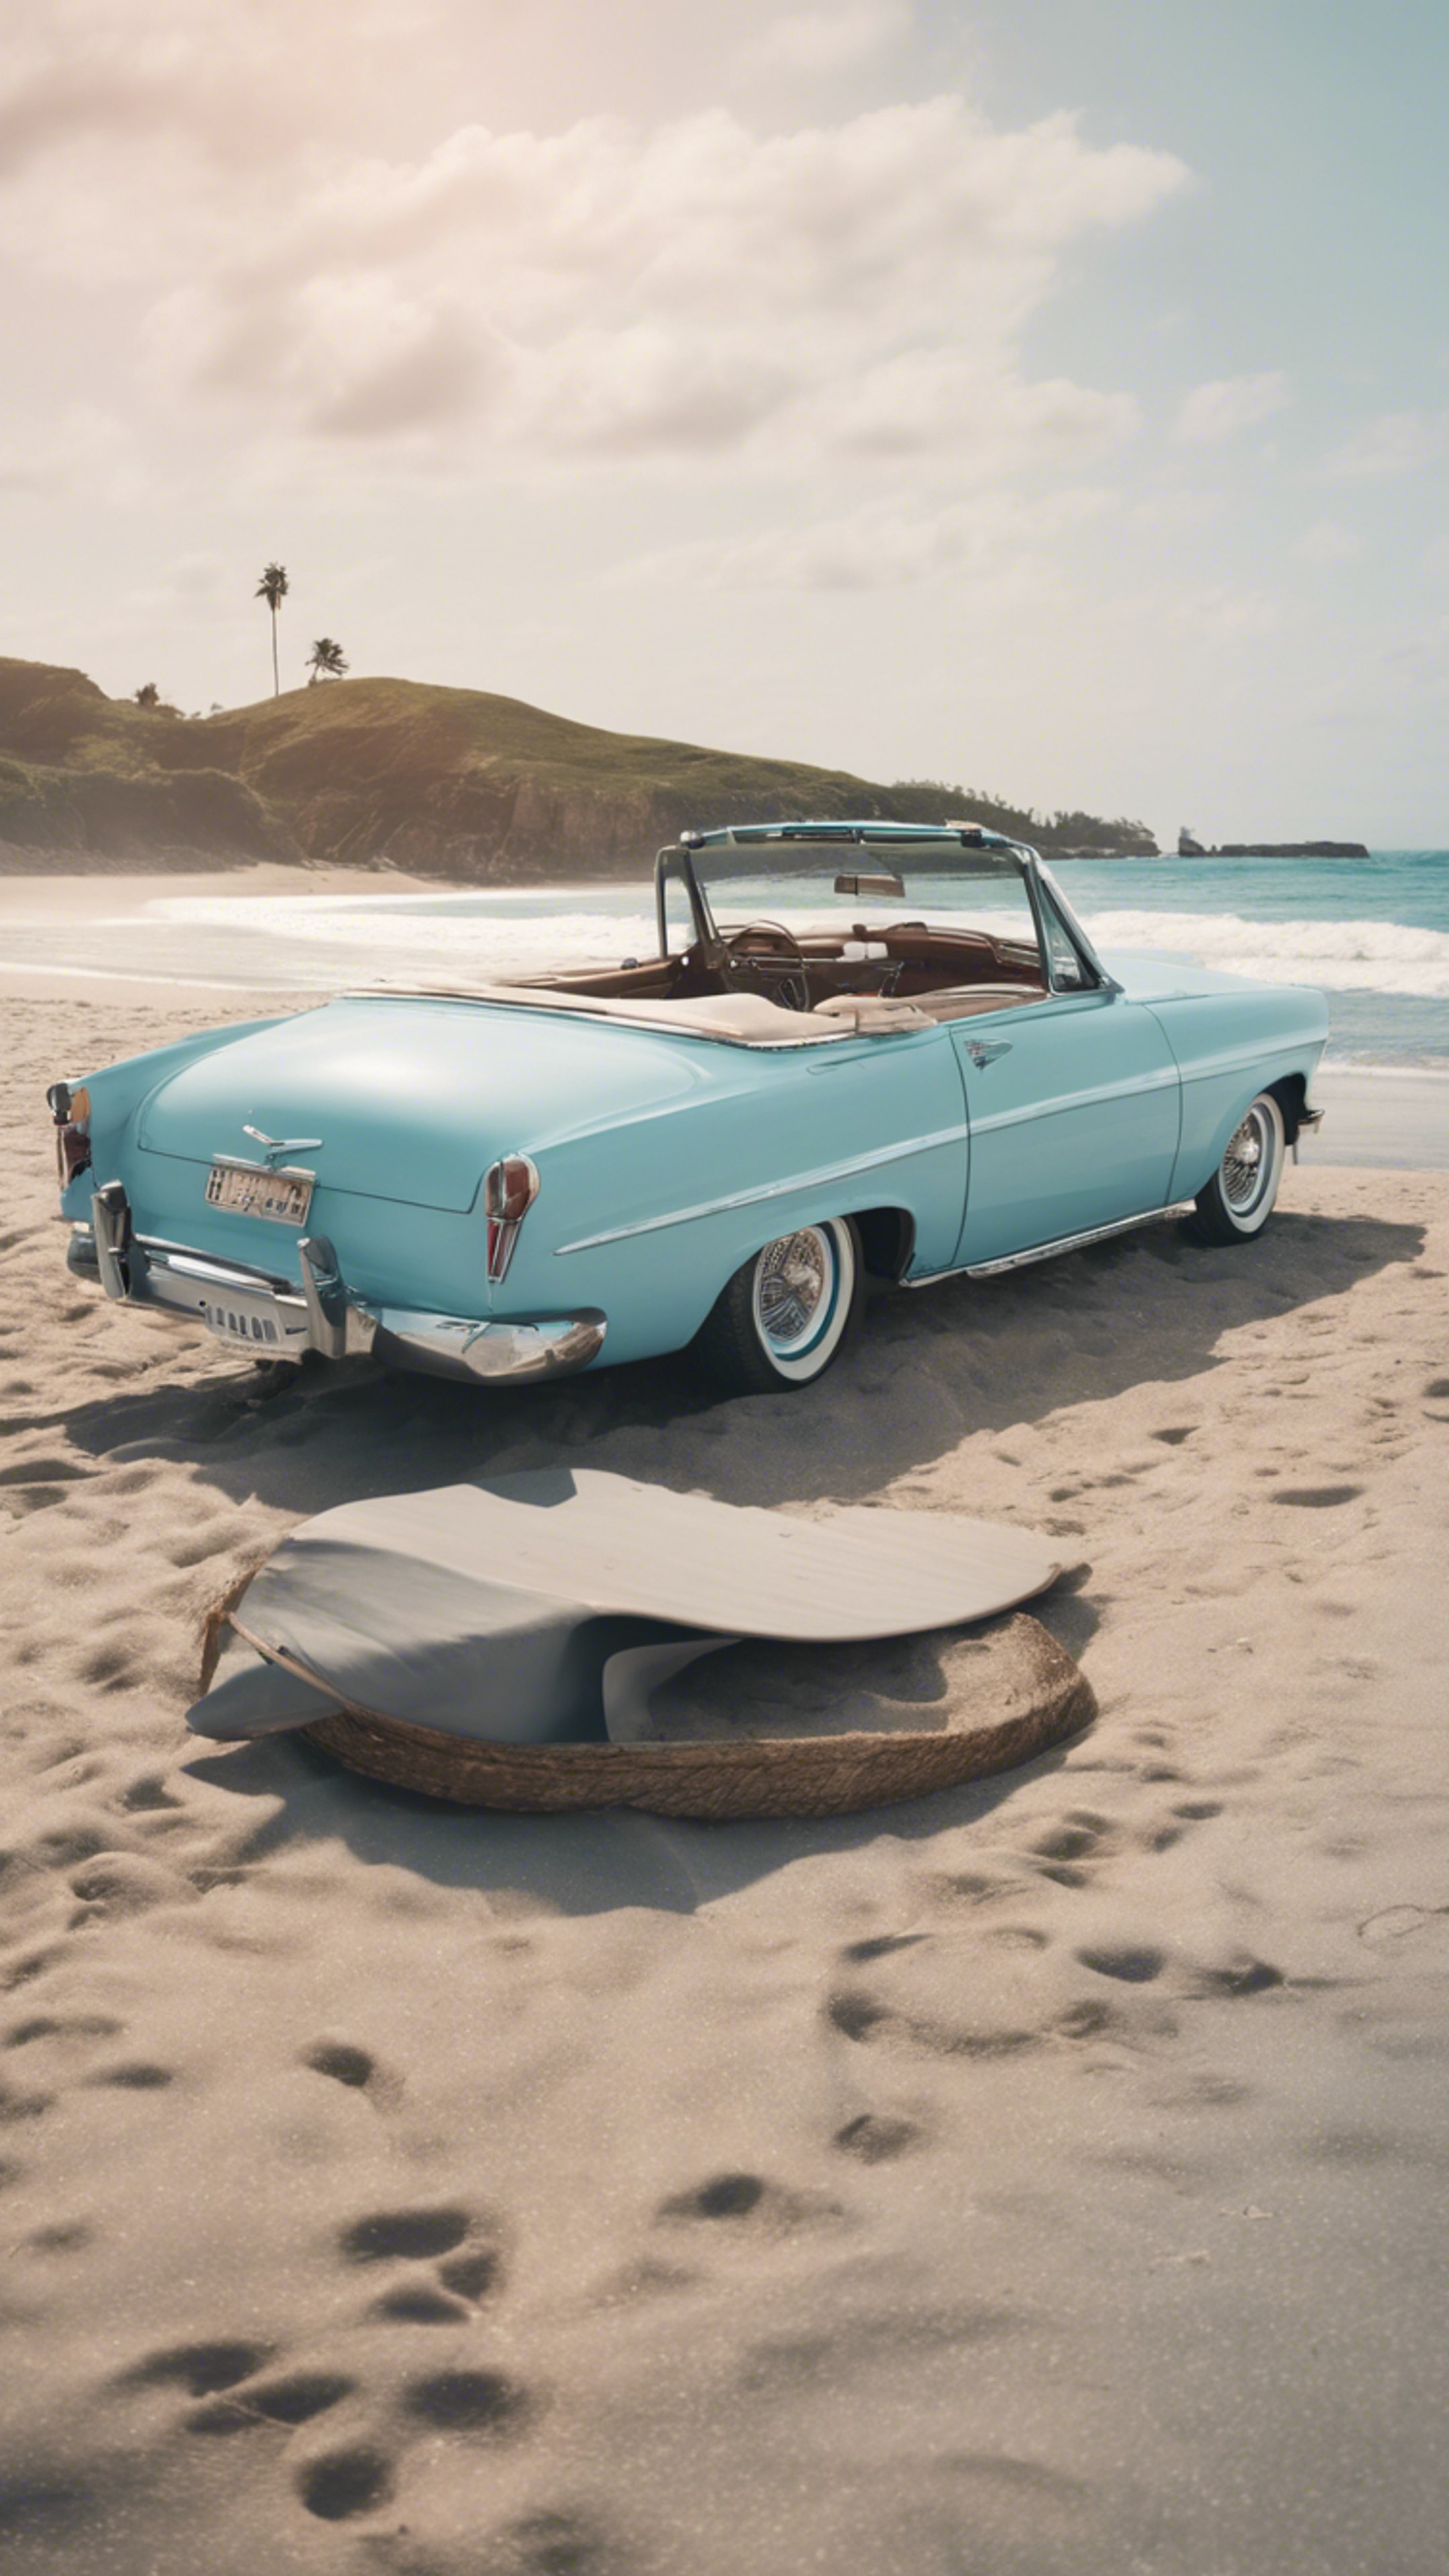 A vintage pastel blue convertible parked by a beach with surfboards leaning against it.壁紙[b081d9fd70654569bba1]